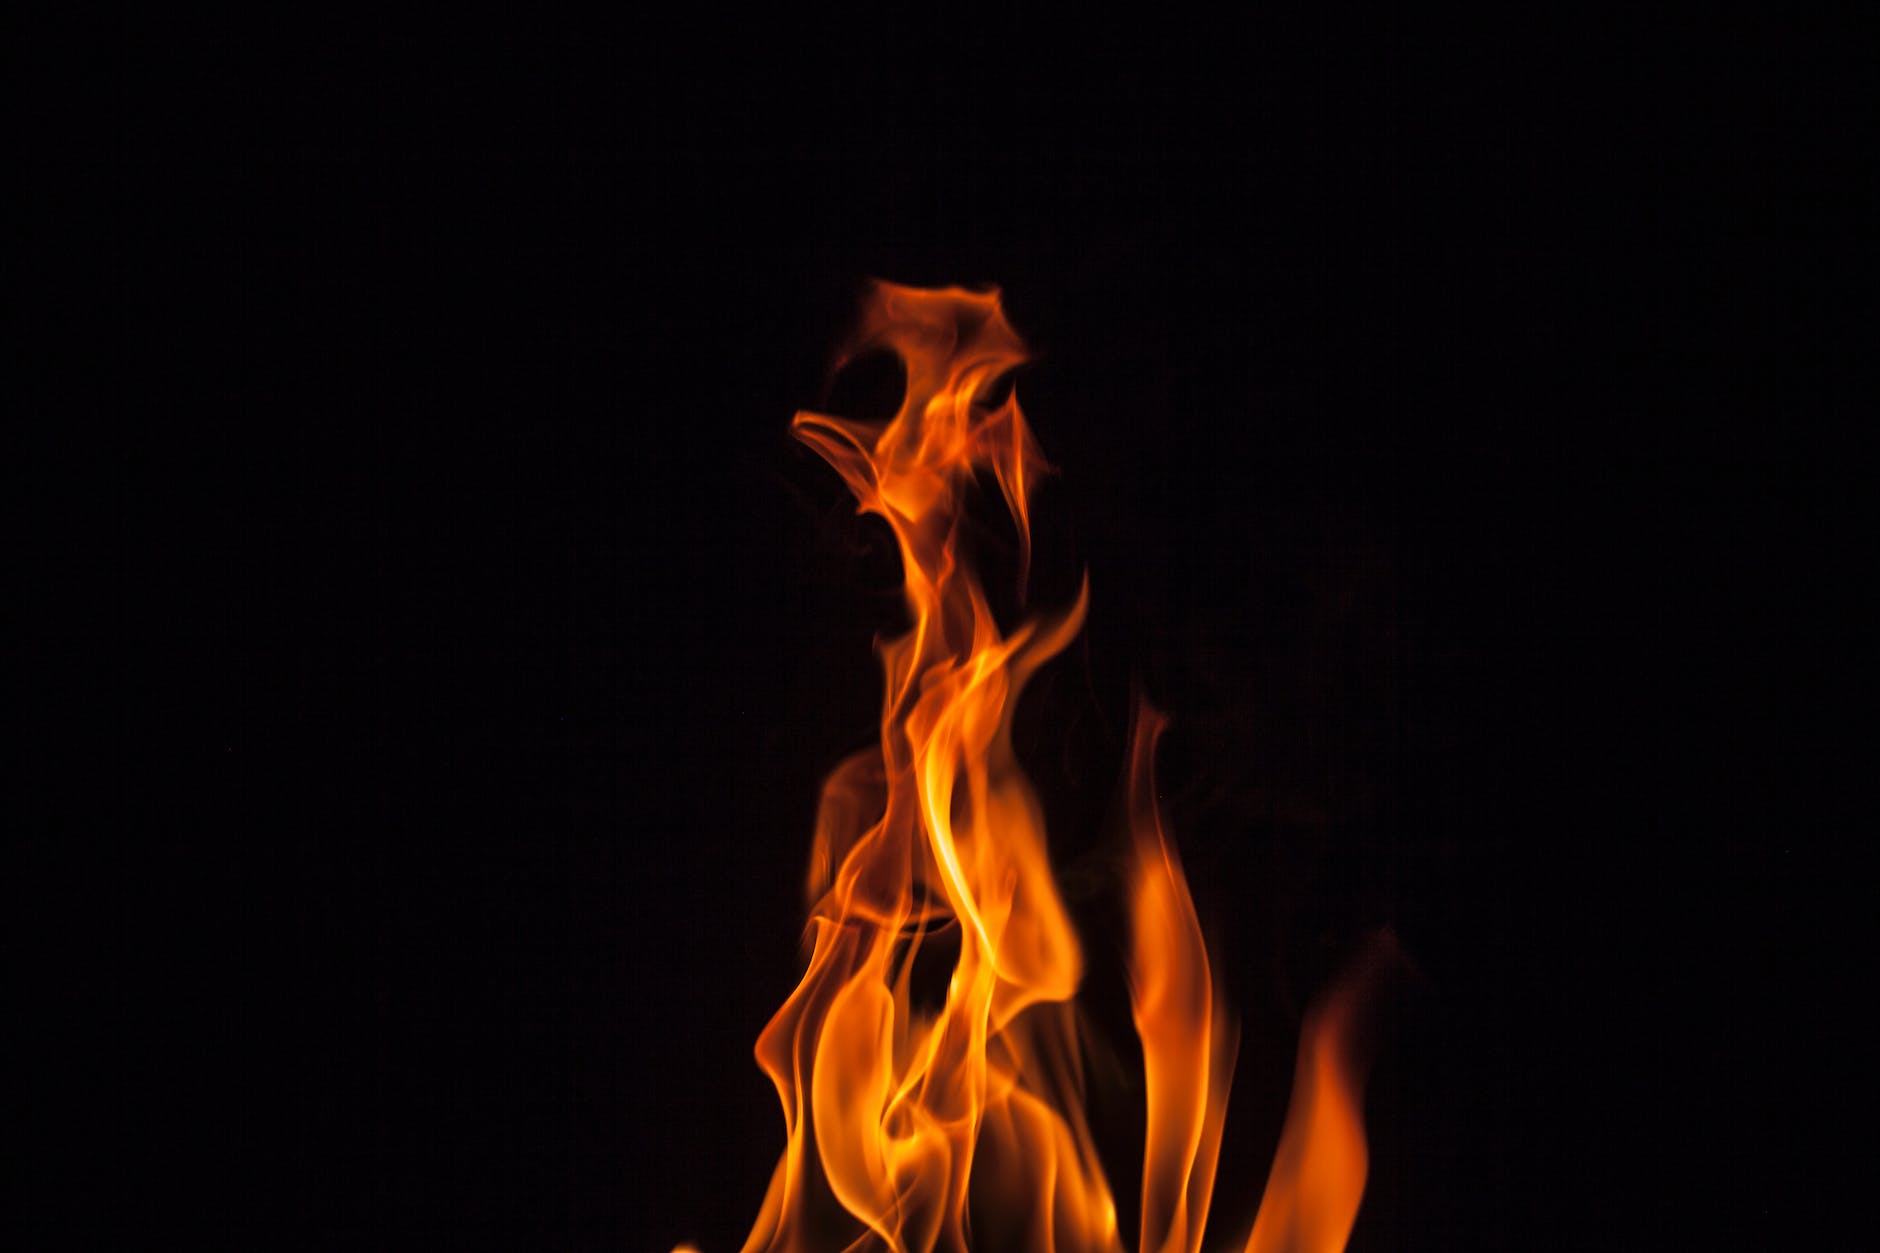 closeup photo of fire during night time